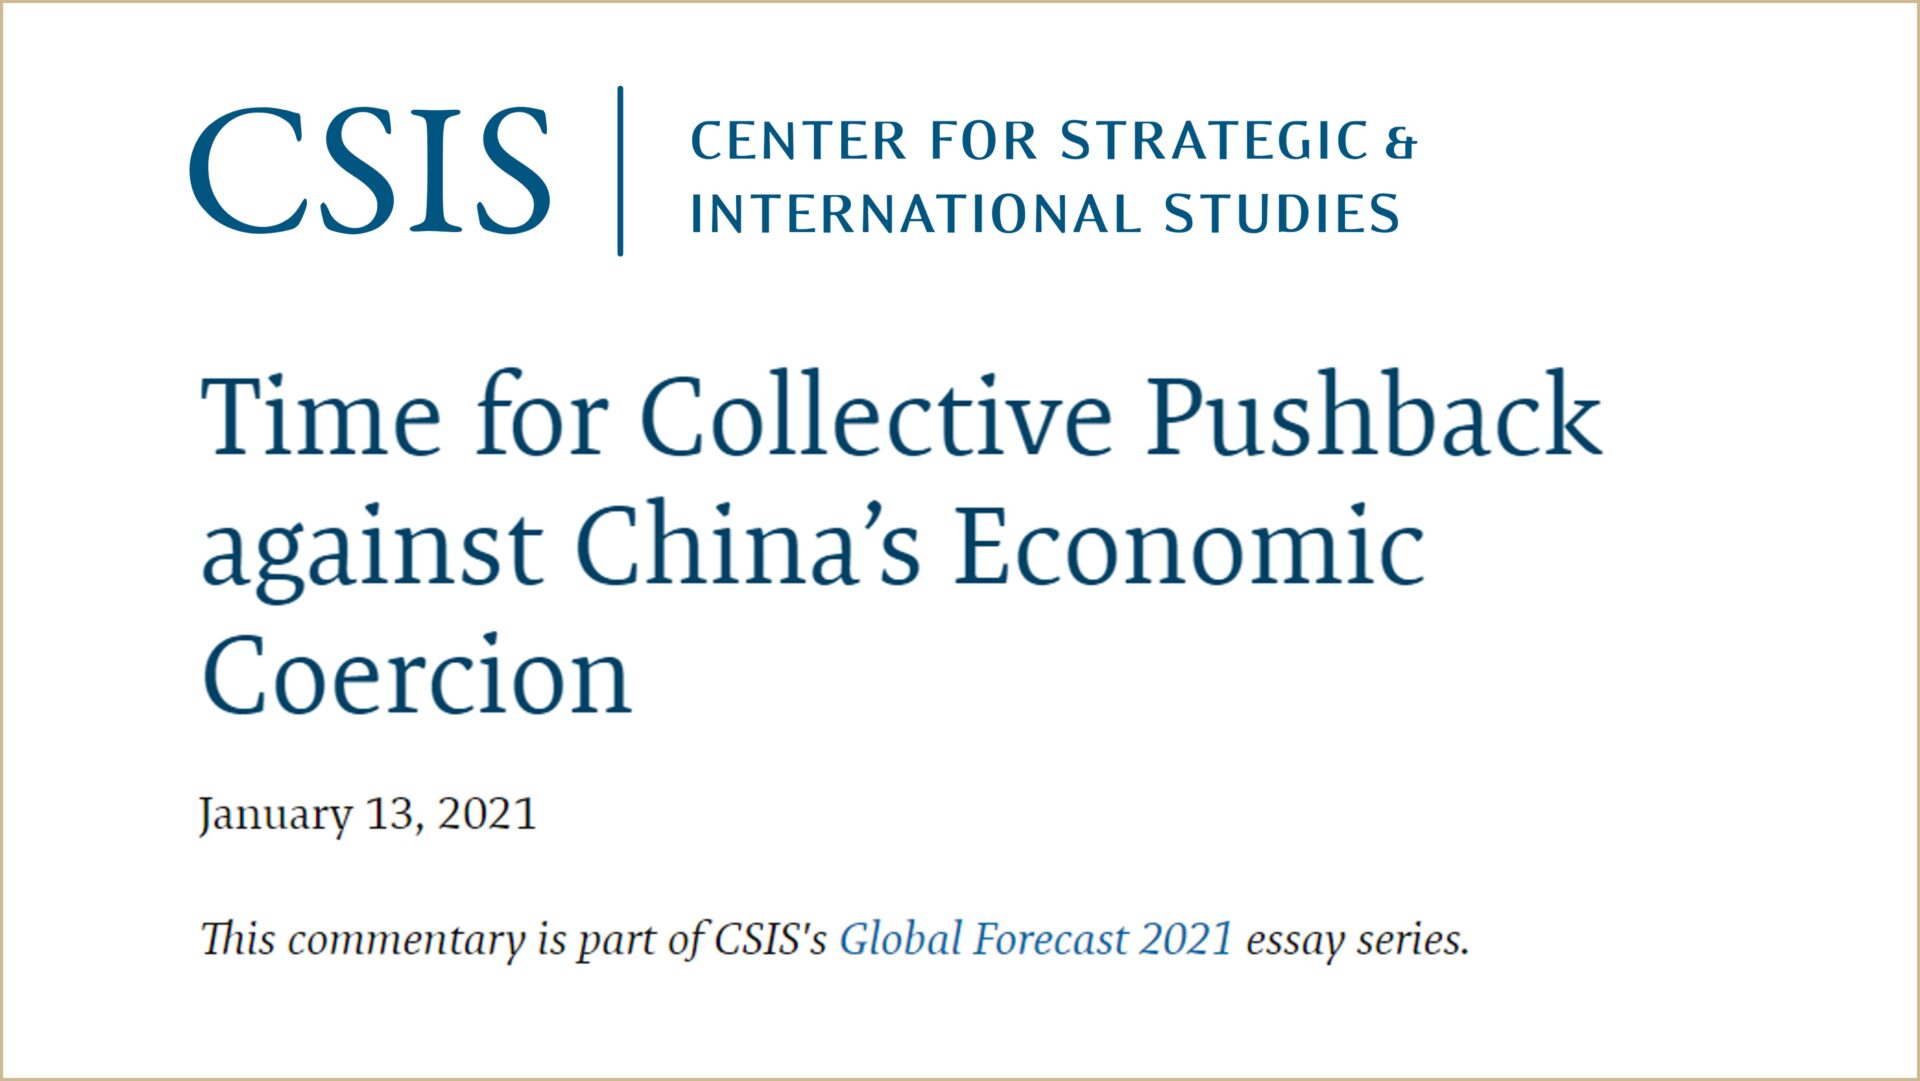 Time for Collective Pushback against China’s Economic Coercion